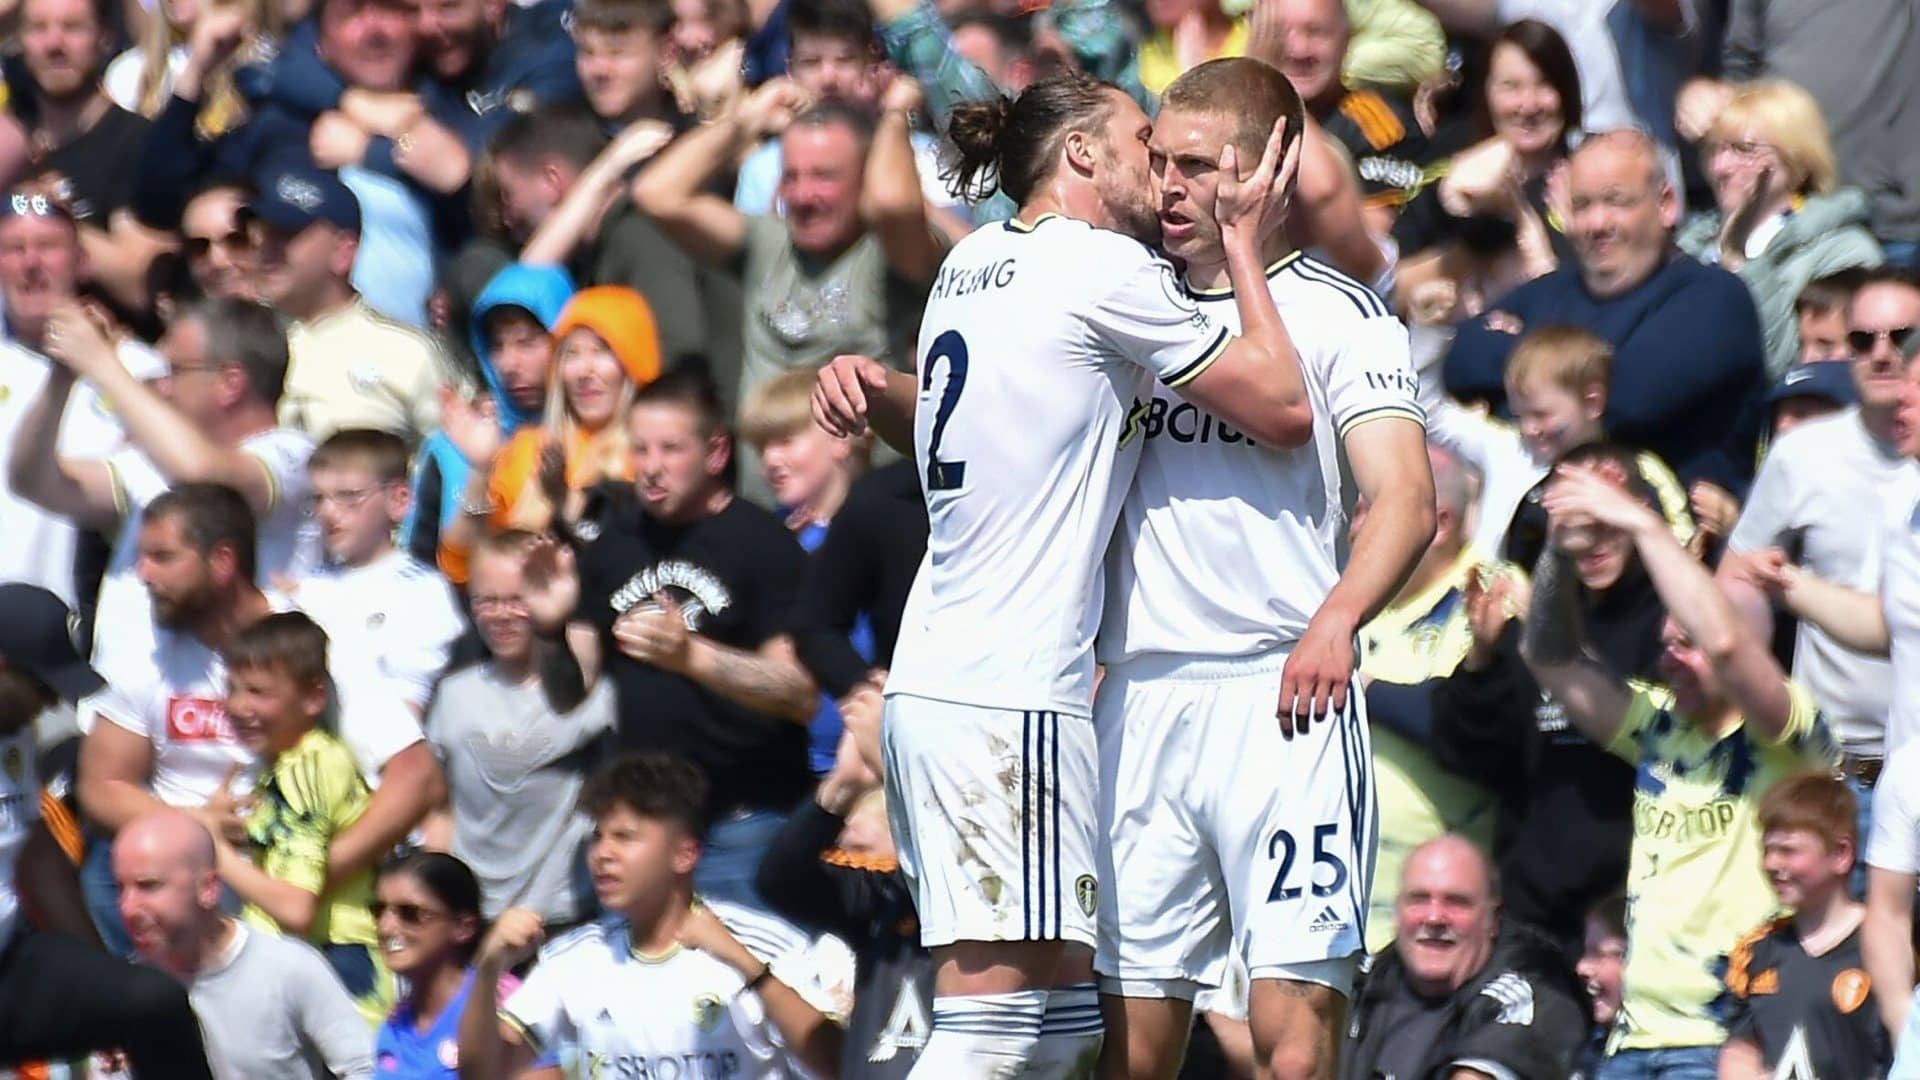 After his goal against Newcastle, Rasmus Kristensen gets a big kiss from Luke Ayling